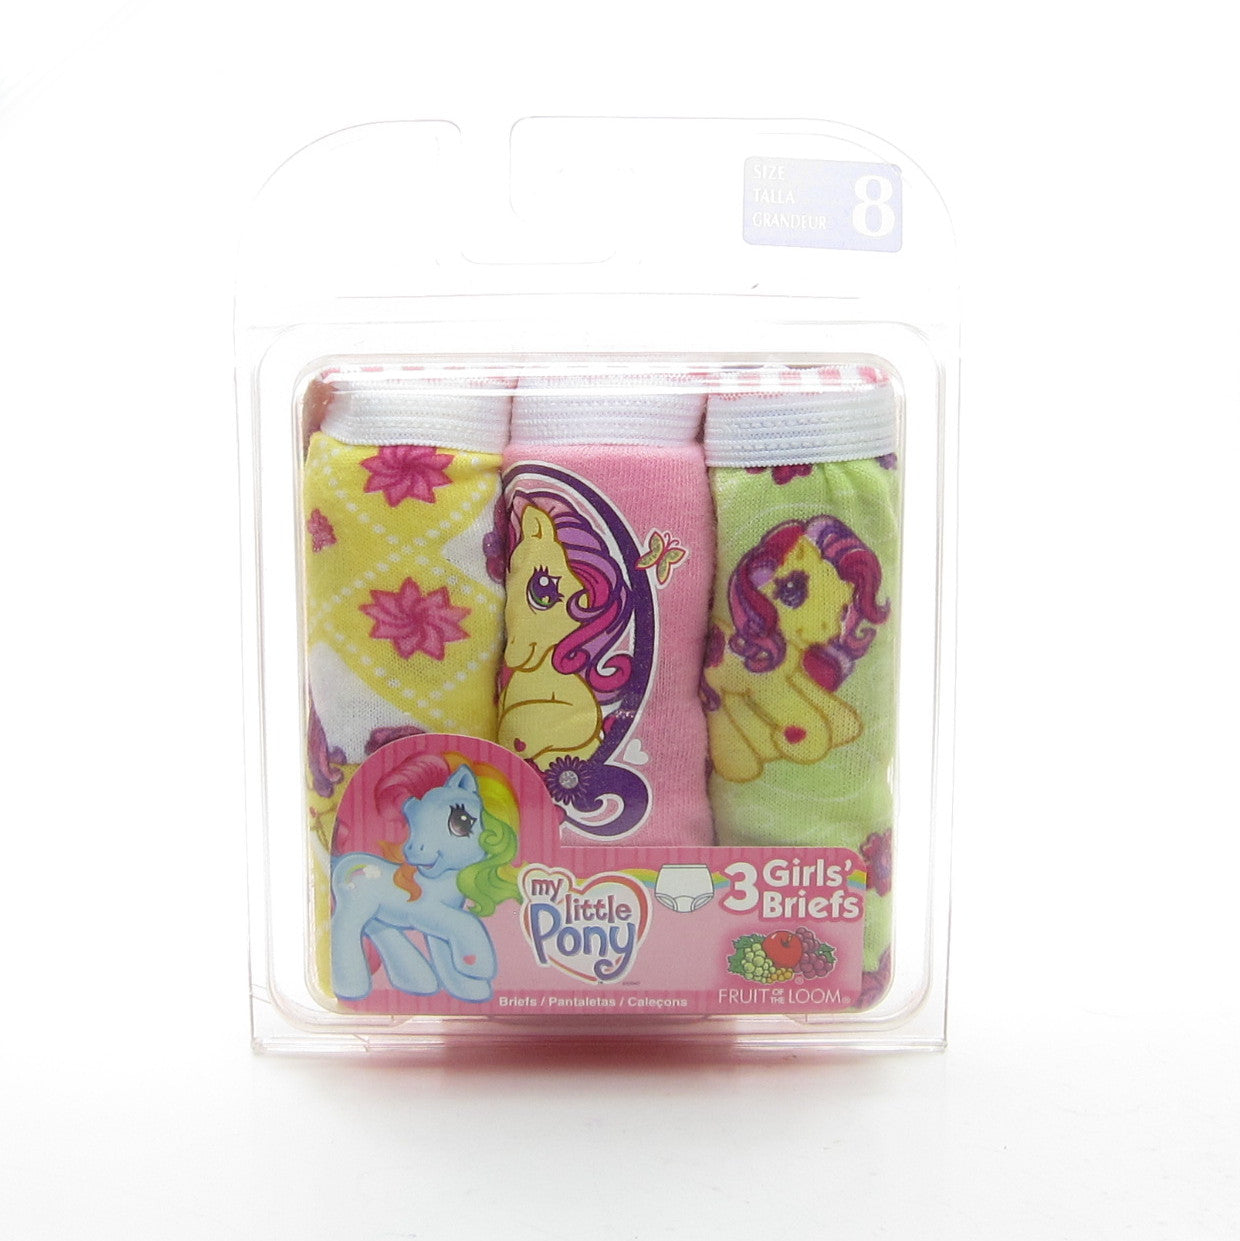 My Little Pony Hipster Panty 3-Pack